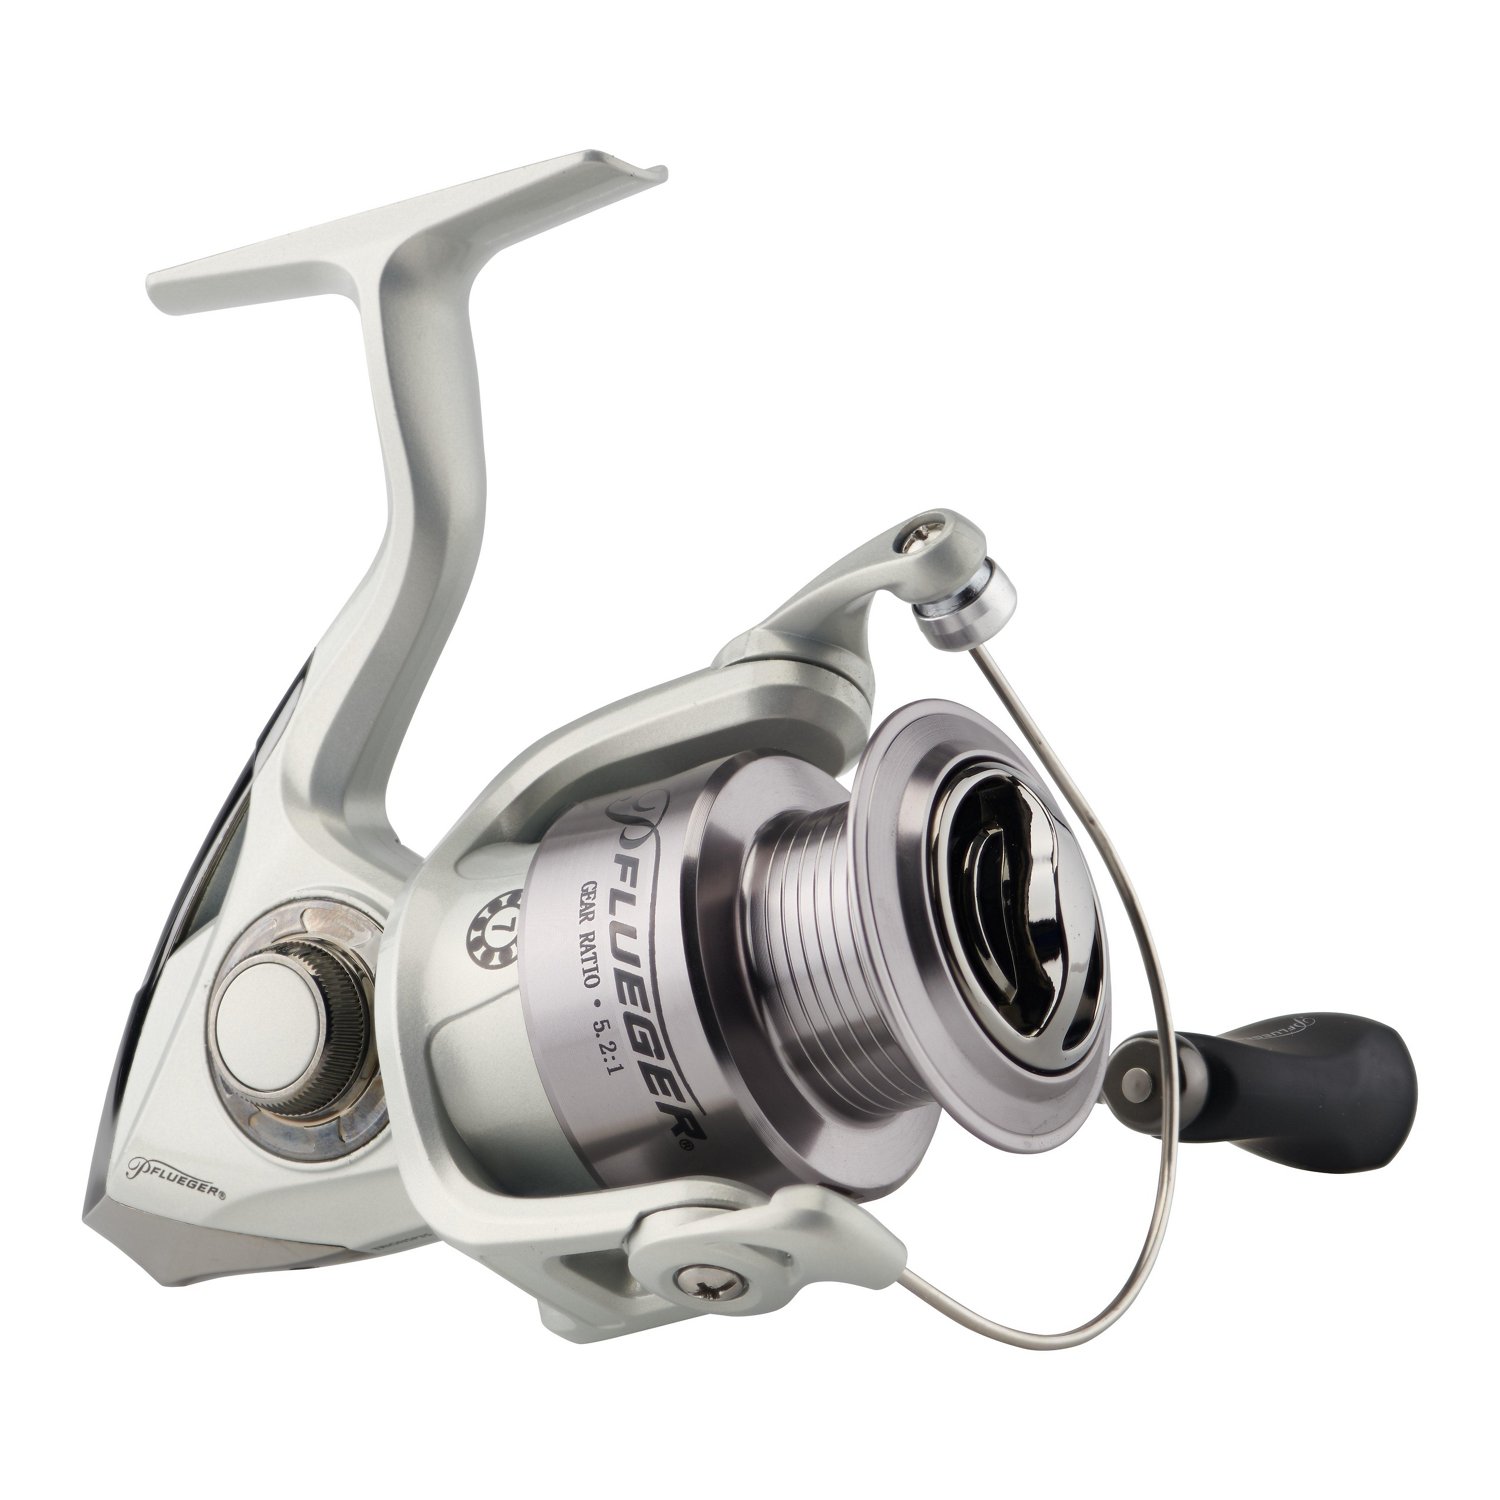 Academy Sports + Outdoors Pflueger Trion Spinning Reel